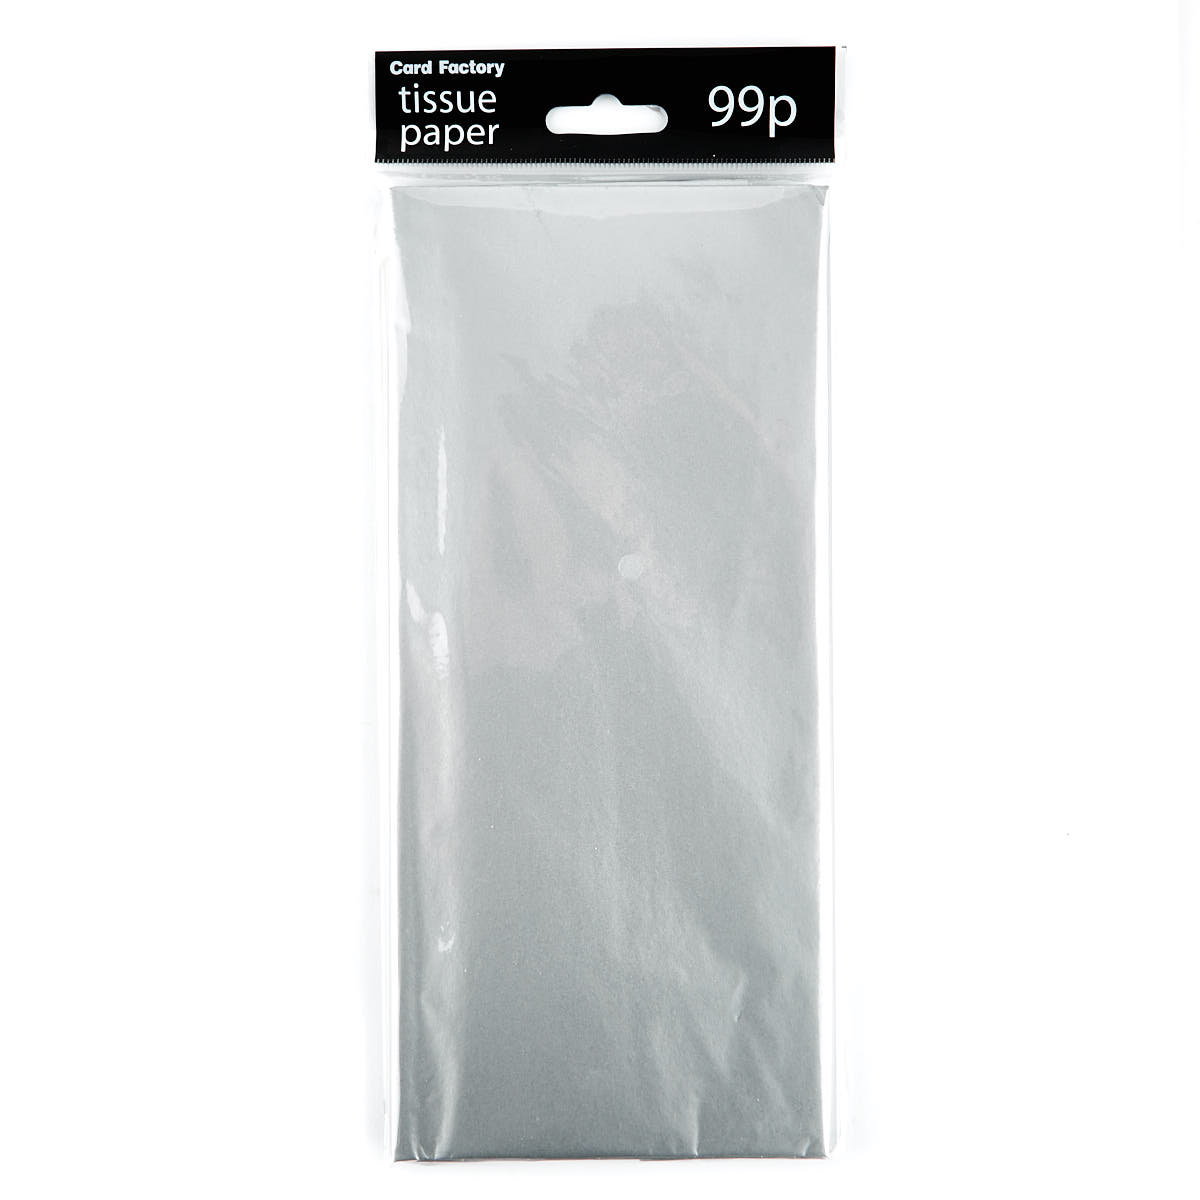 Silver Tissue Paper - 10 Sheets